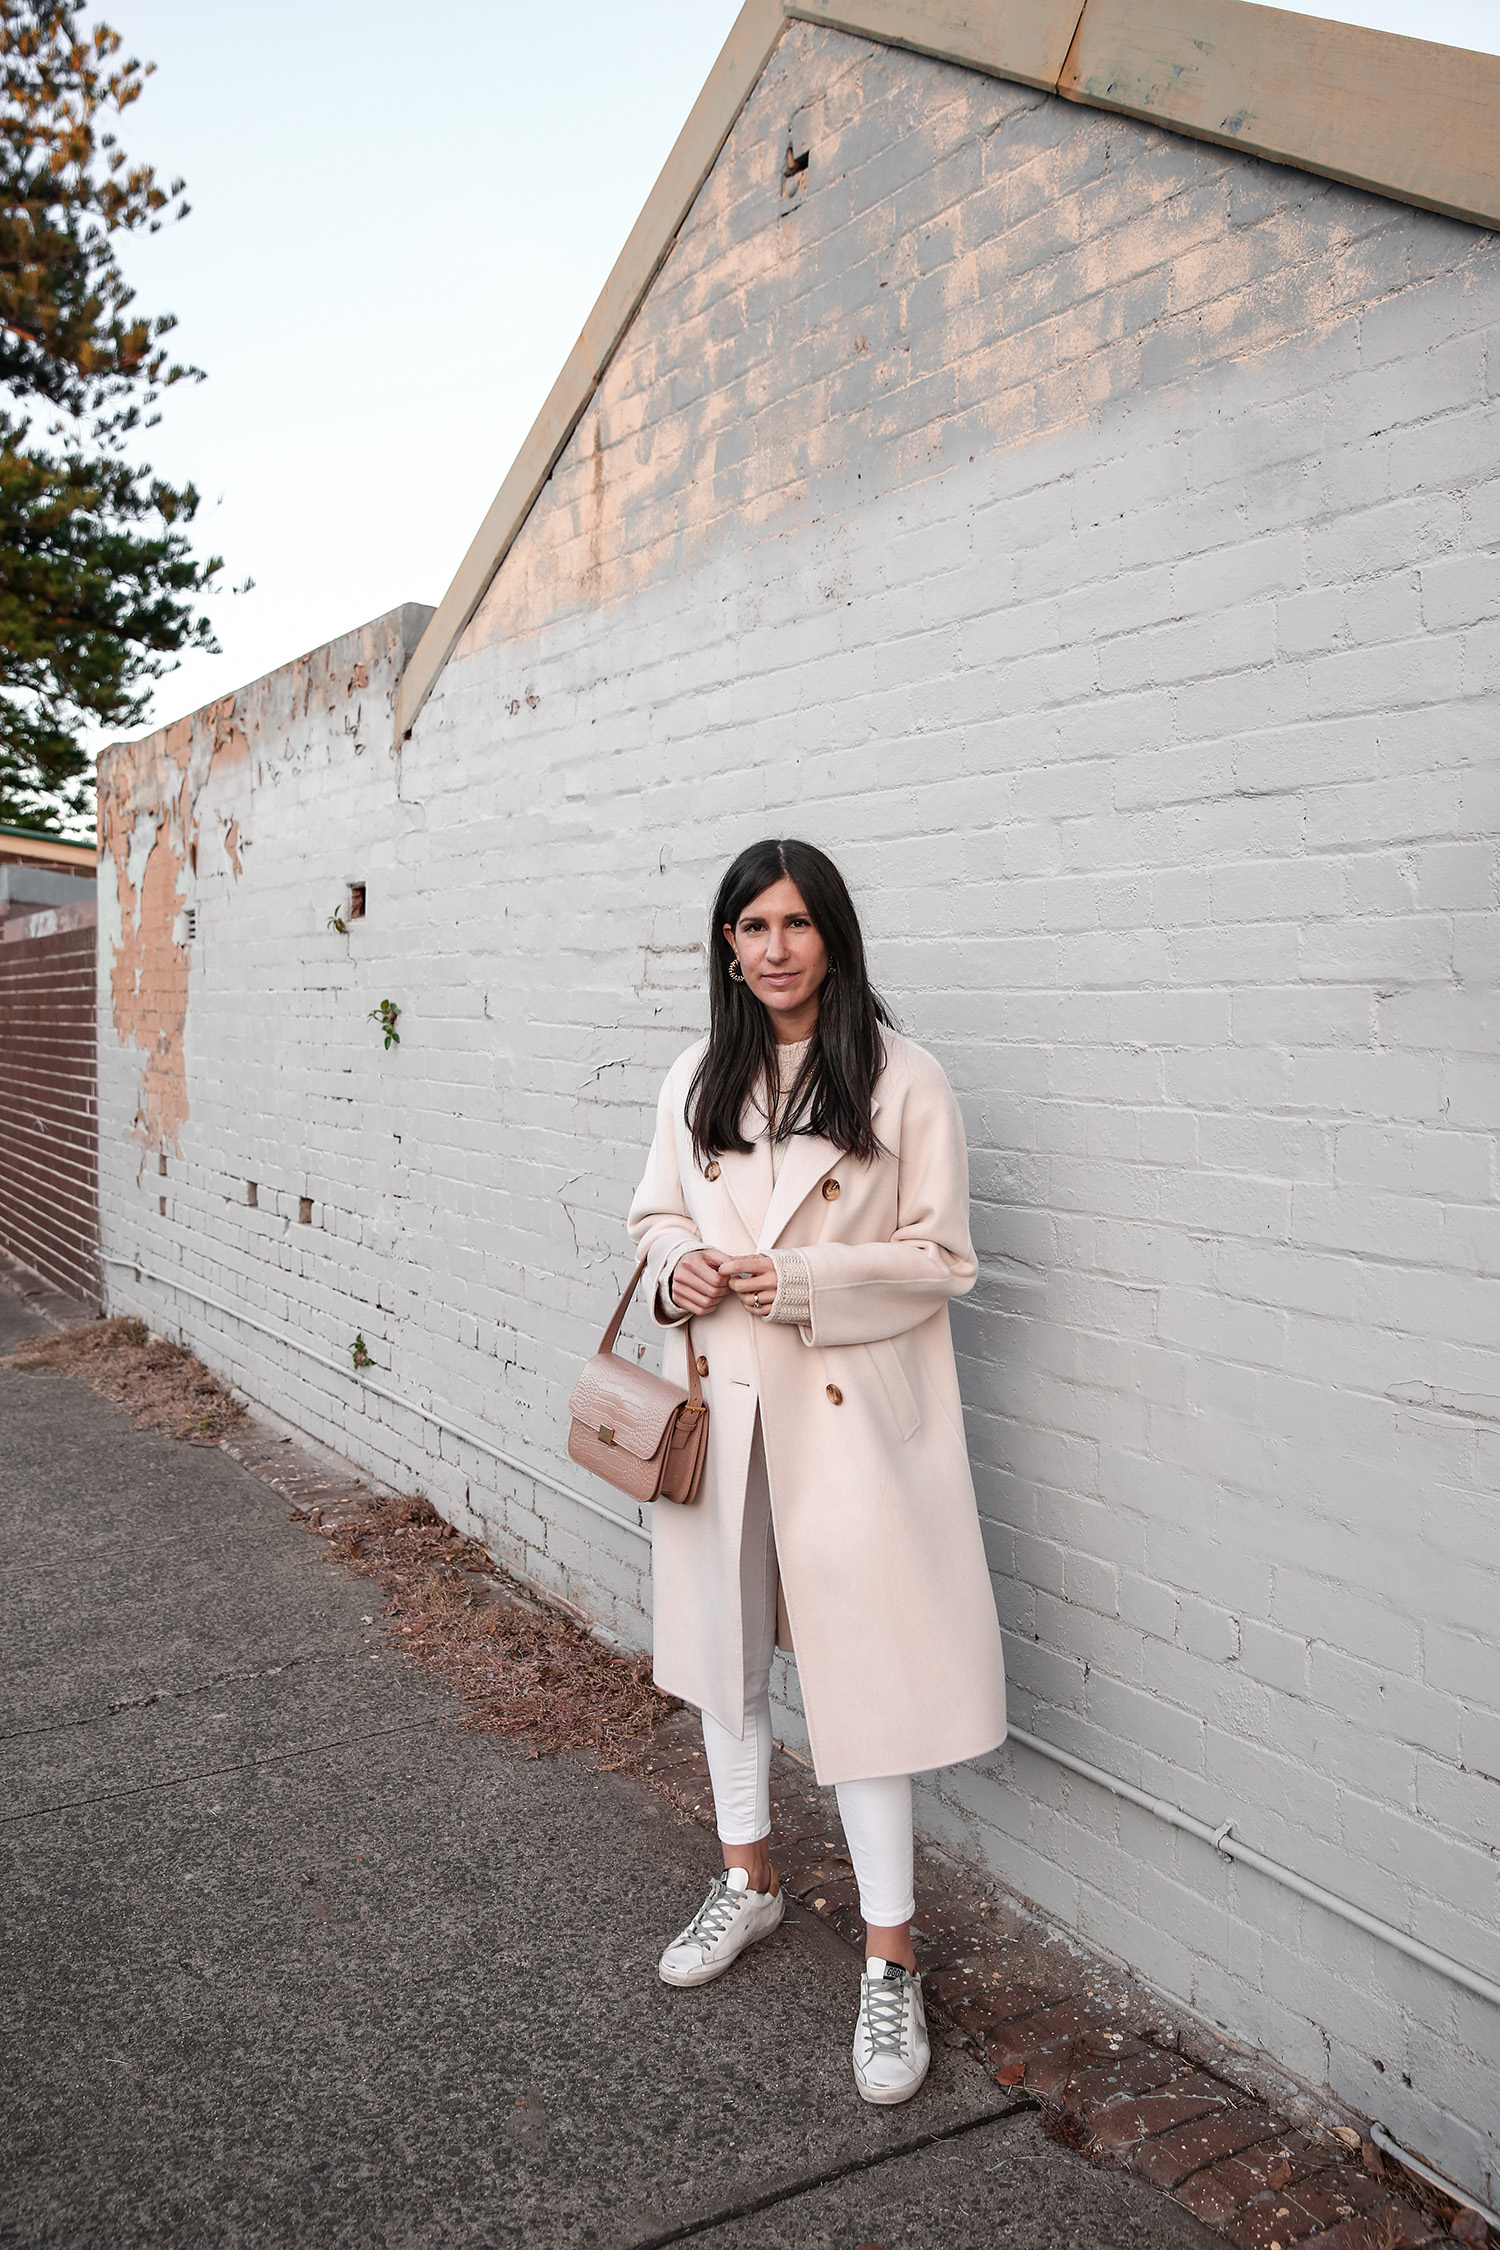 Minimal Outfit in nude neutrals tones